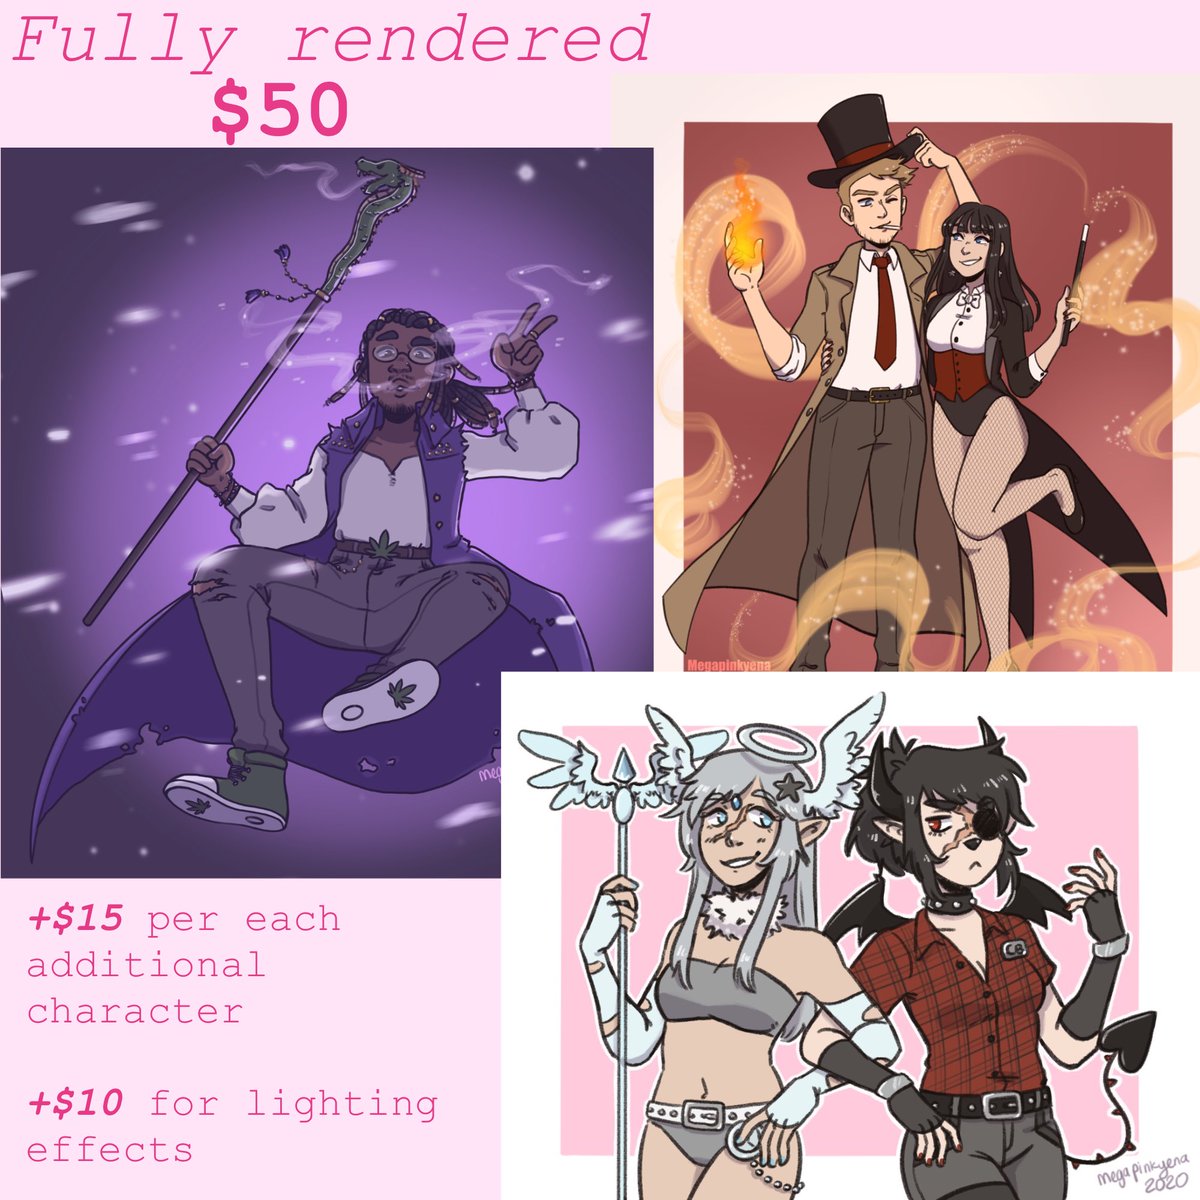 ‼️ COMMISSIONS OPEN PERMANENTLY‼️
I can show additional artwork samples if needed.
DM or email me if you are interested. :)

Email: megapinkyena@gmail.com
Instagram: megapinkyena
Patreon: MegaPinkyena

#under1kgang 